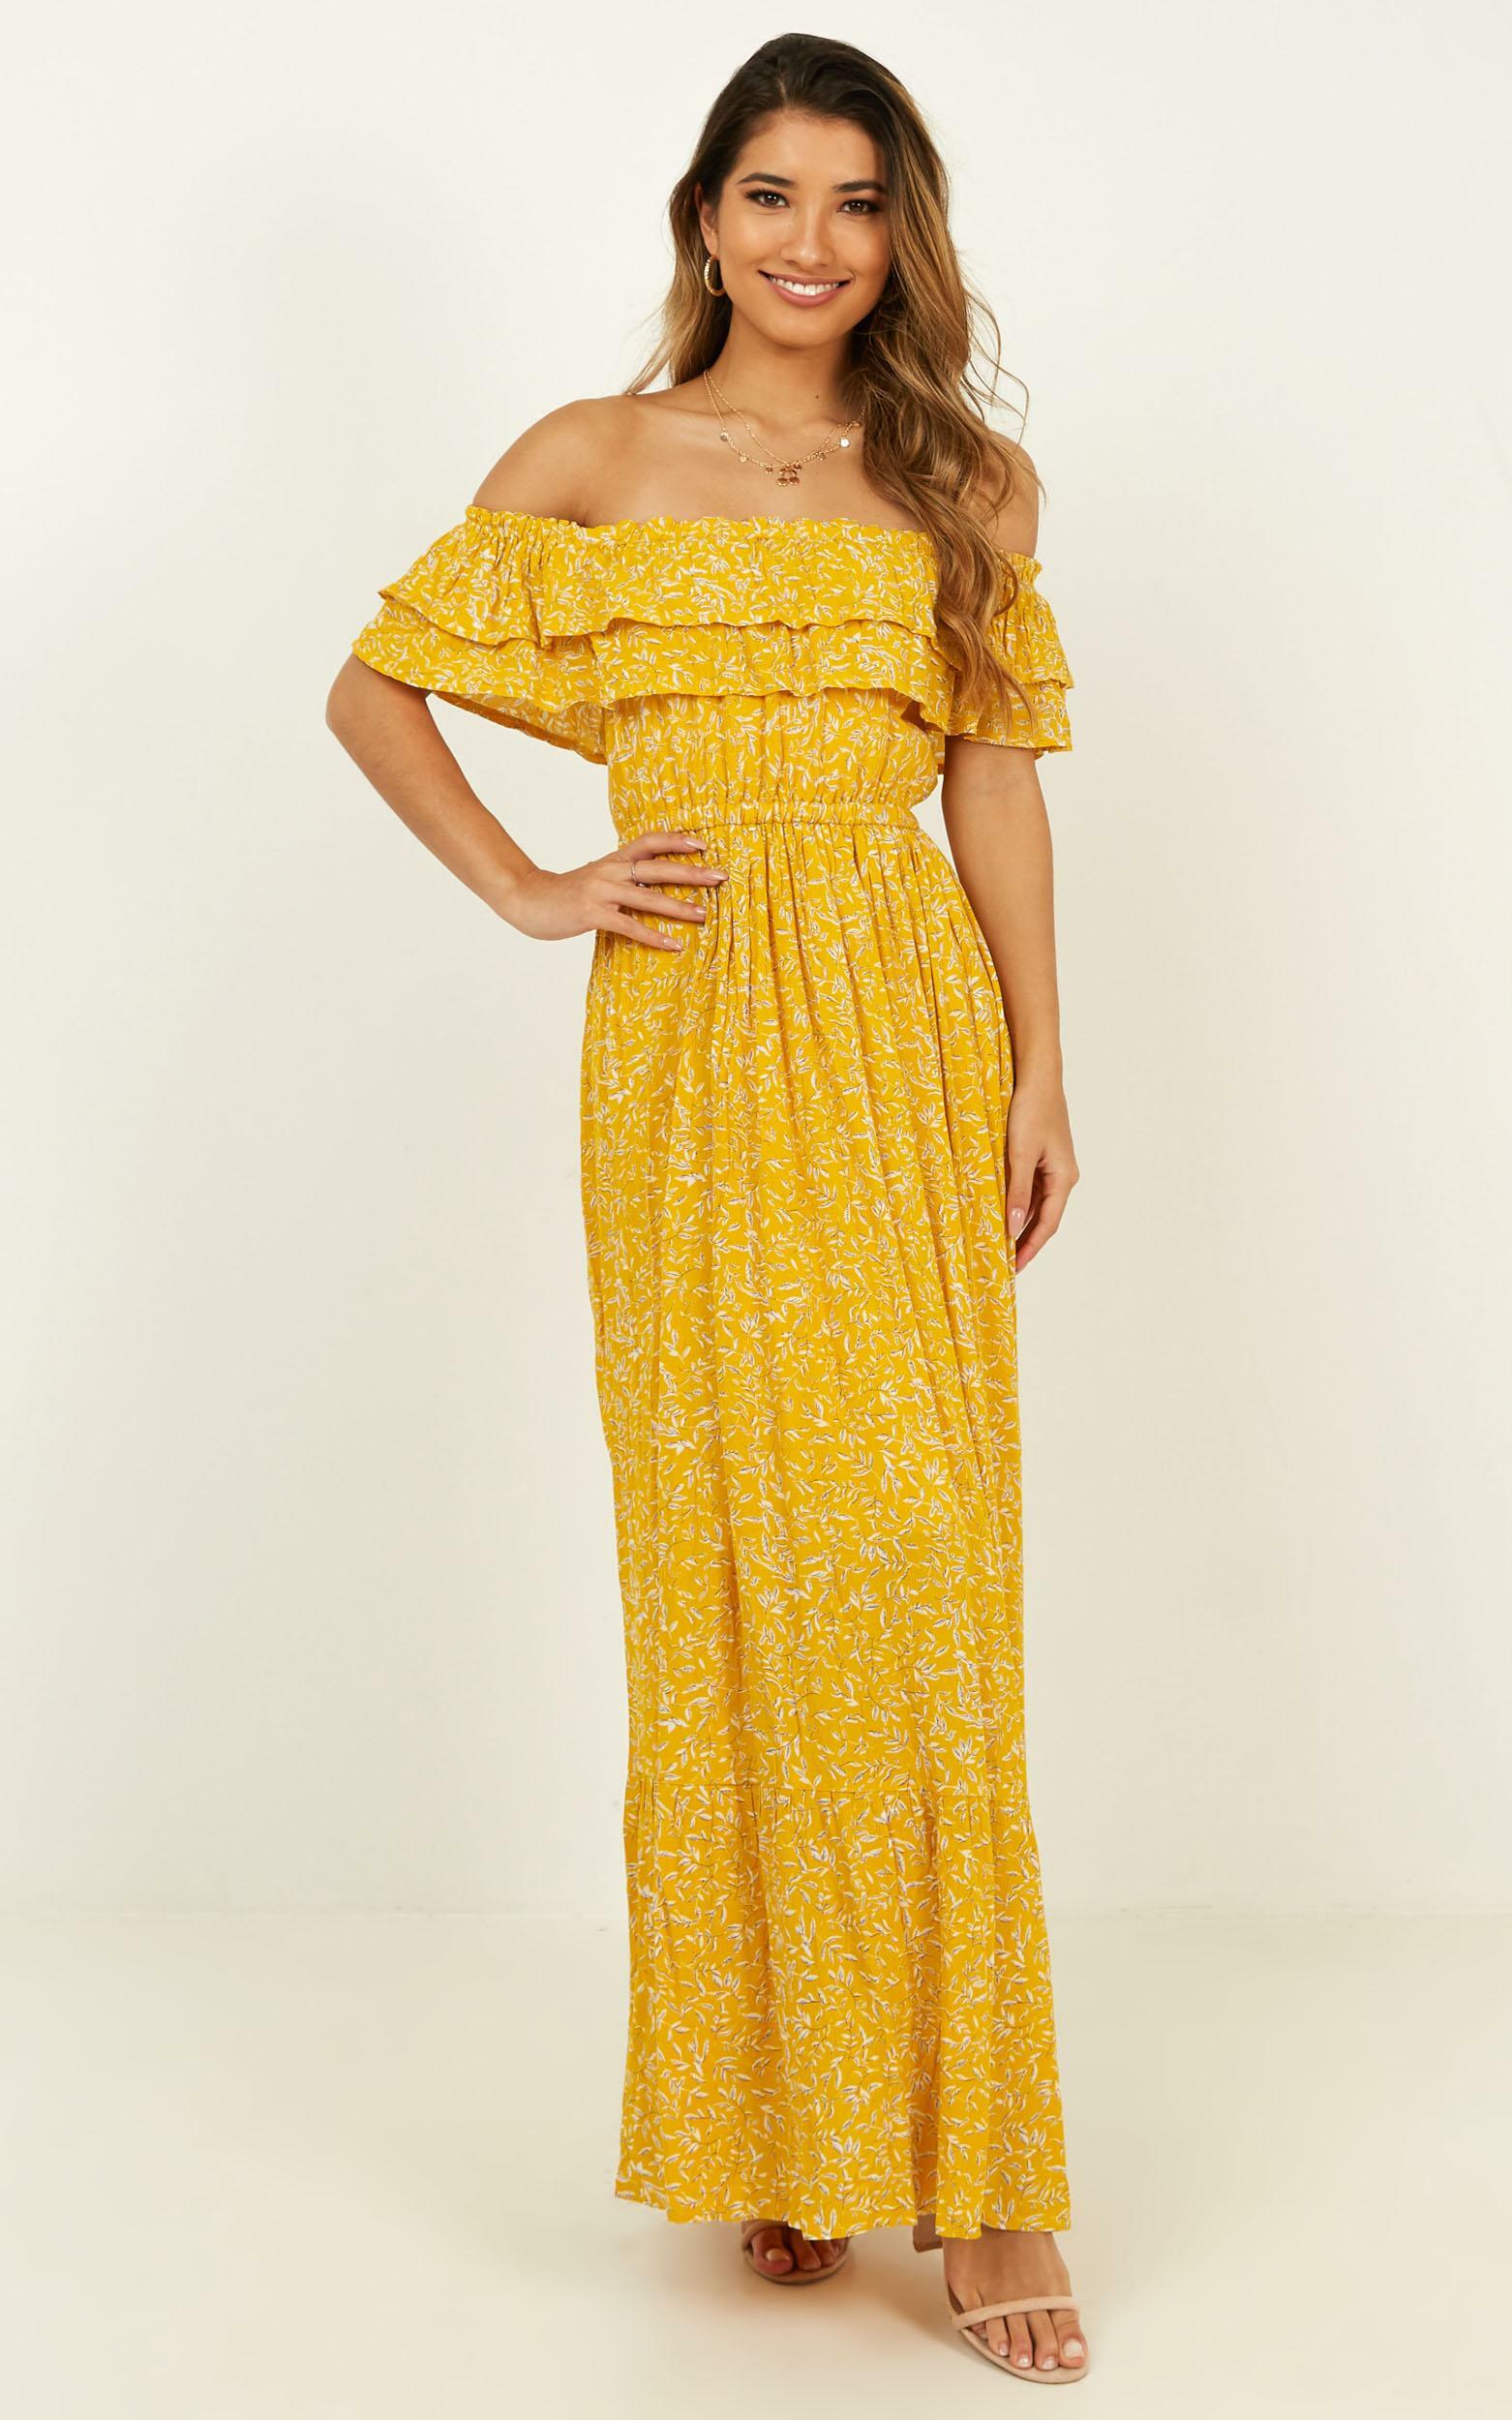 Notre Dame Off Shoulder Maxi Dress in Yellow Floral - 04, YEL5, hi-res image number null